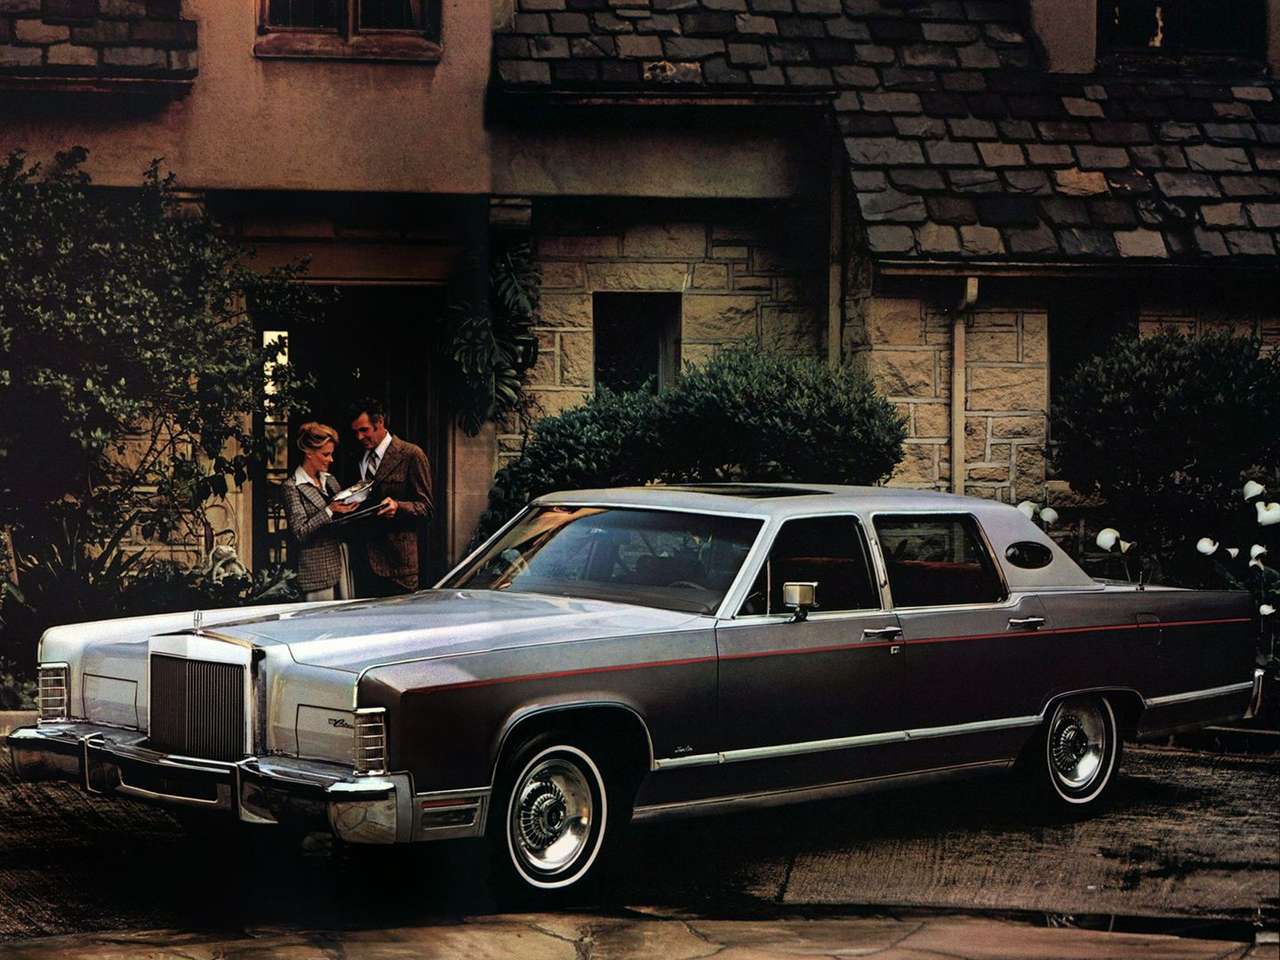 1978 Lincoln Continental Town Car. online puzzle